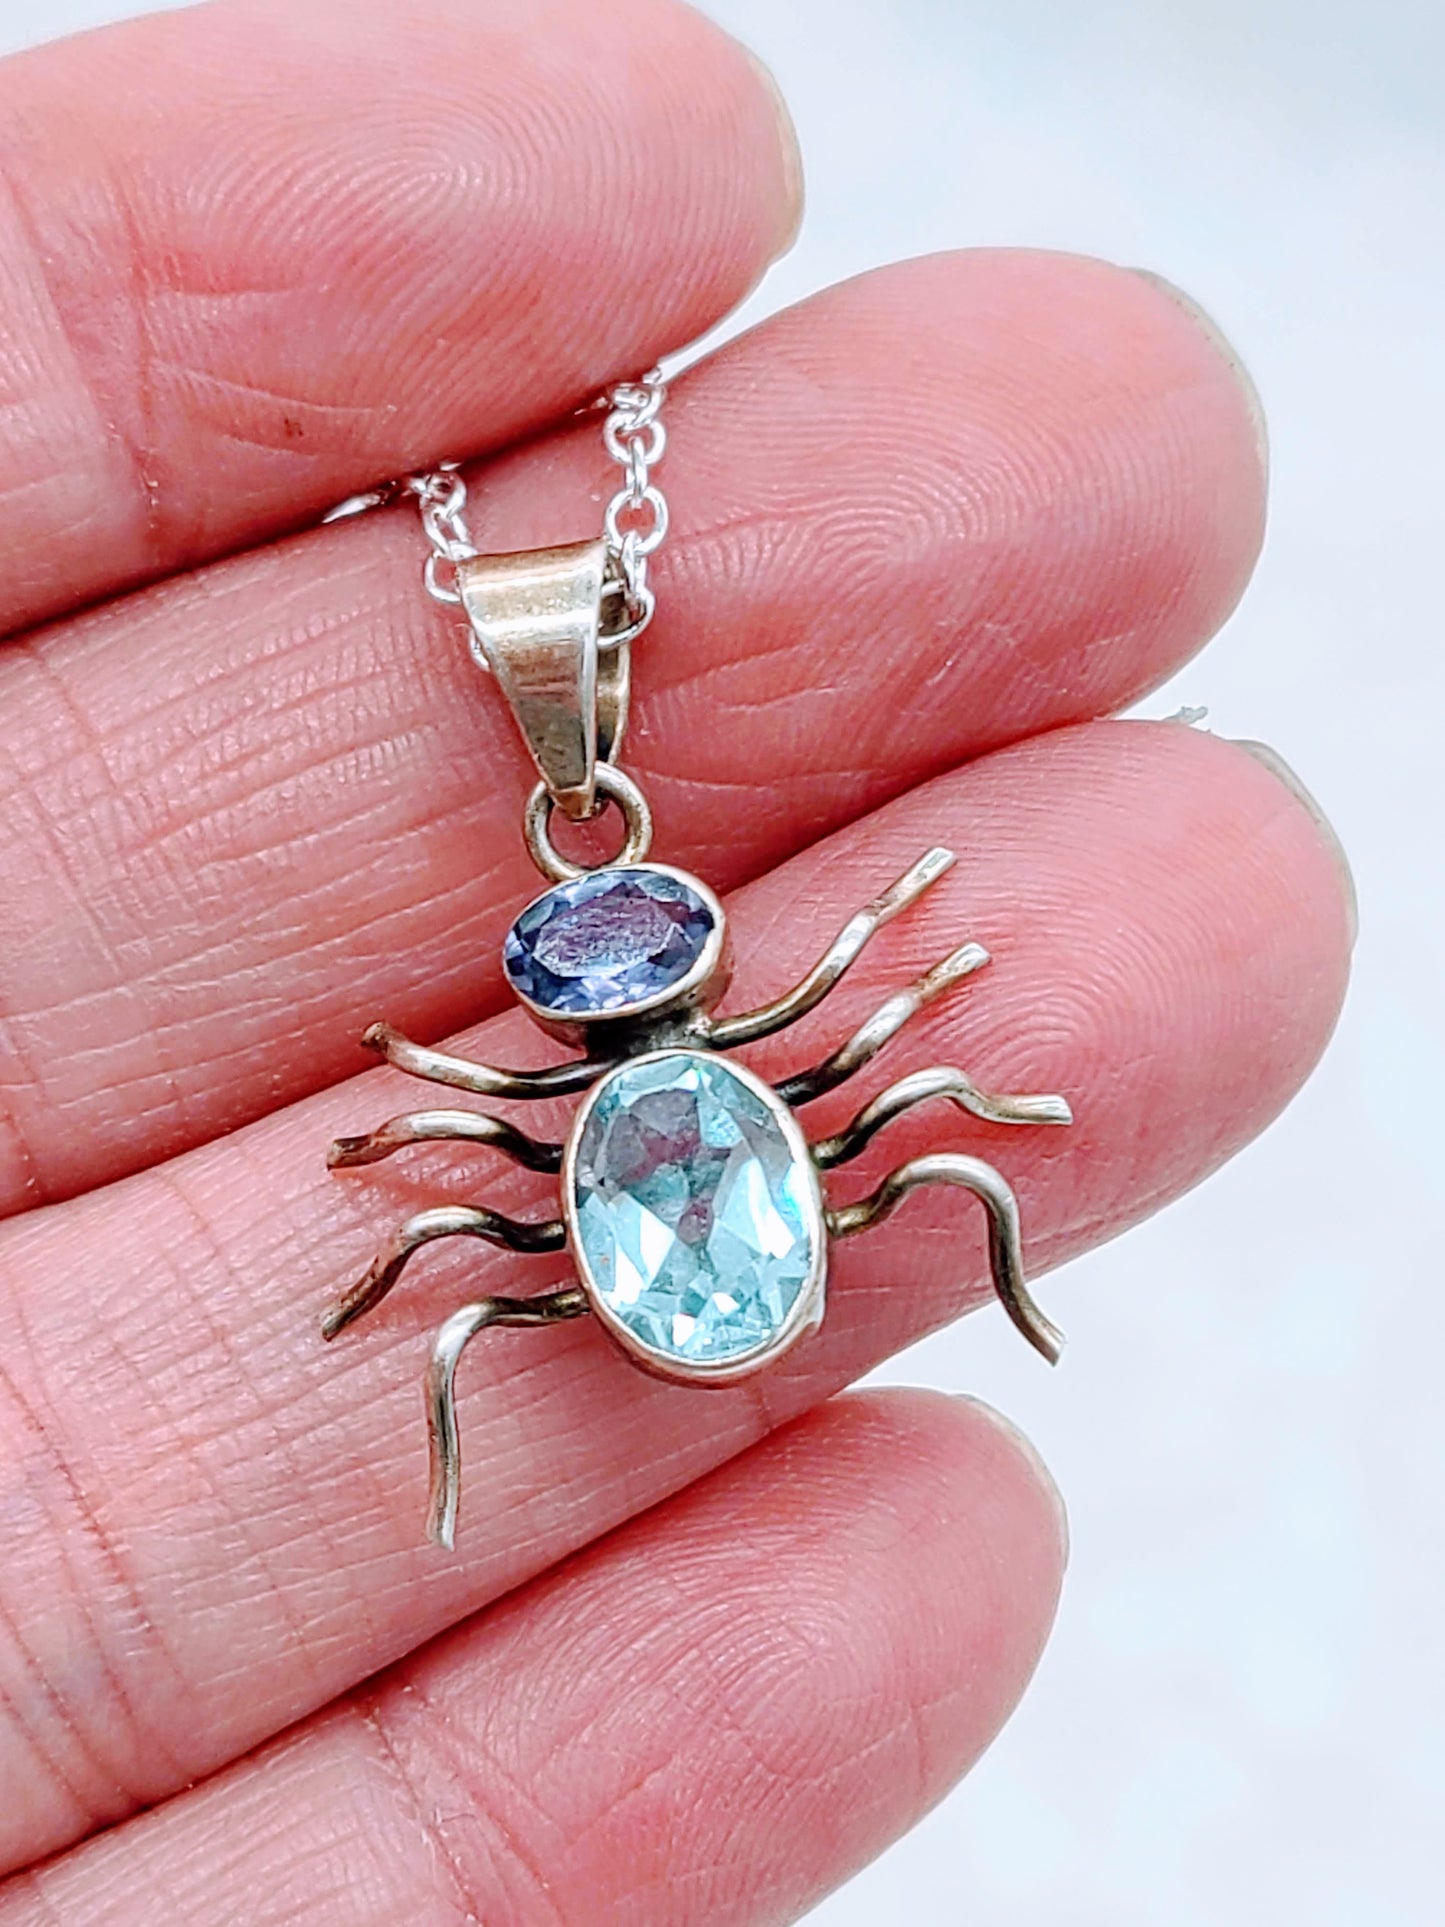 Wicked Weaver Spider Necklace ~ OOAK Artist Made Aquamarine and Amethyst Sterling Sterling Silver Necklace ~ 925 Sterling ~ On 17" Chain